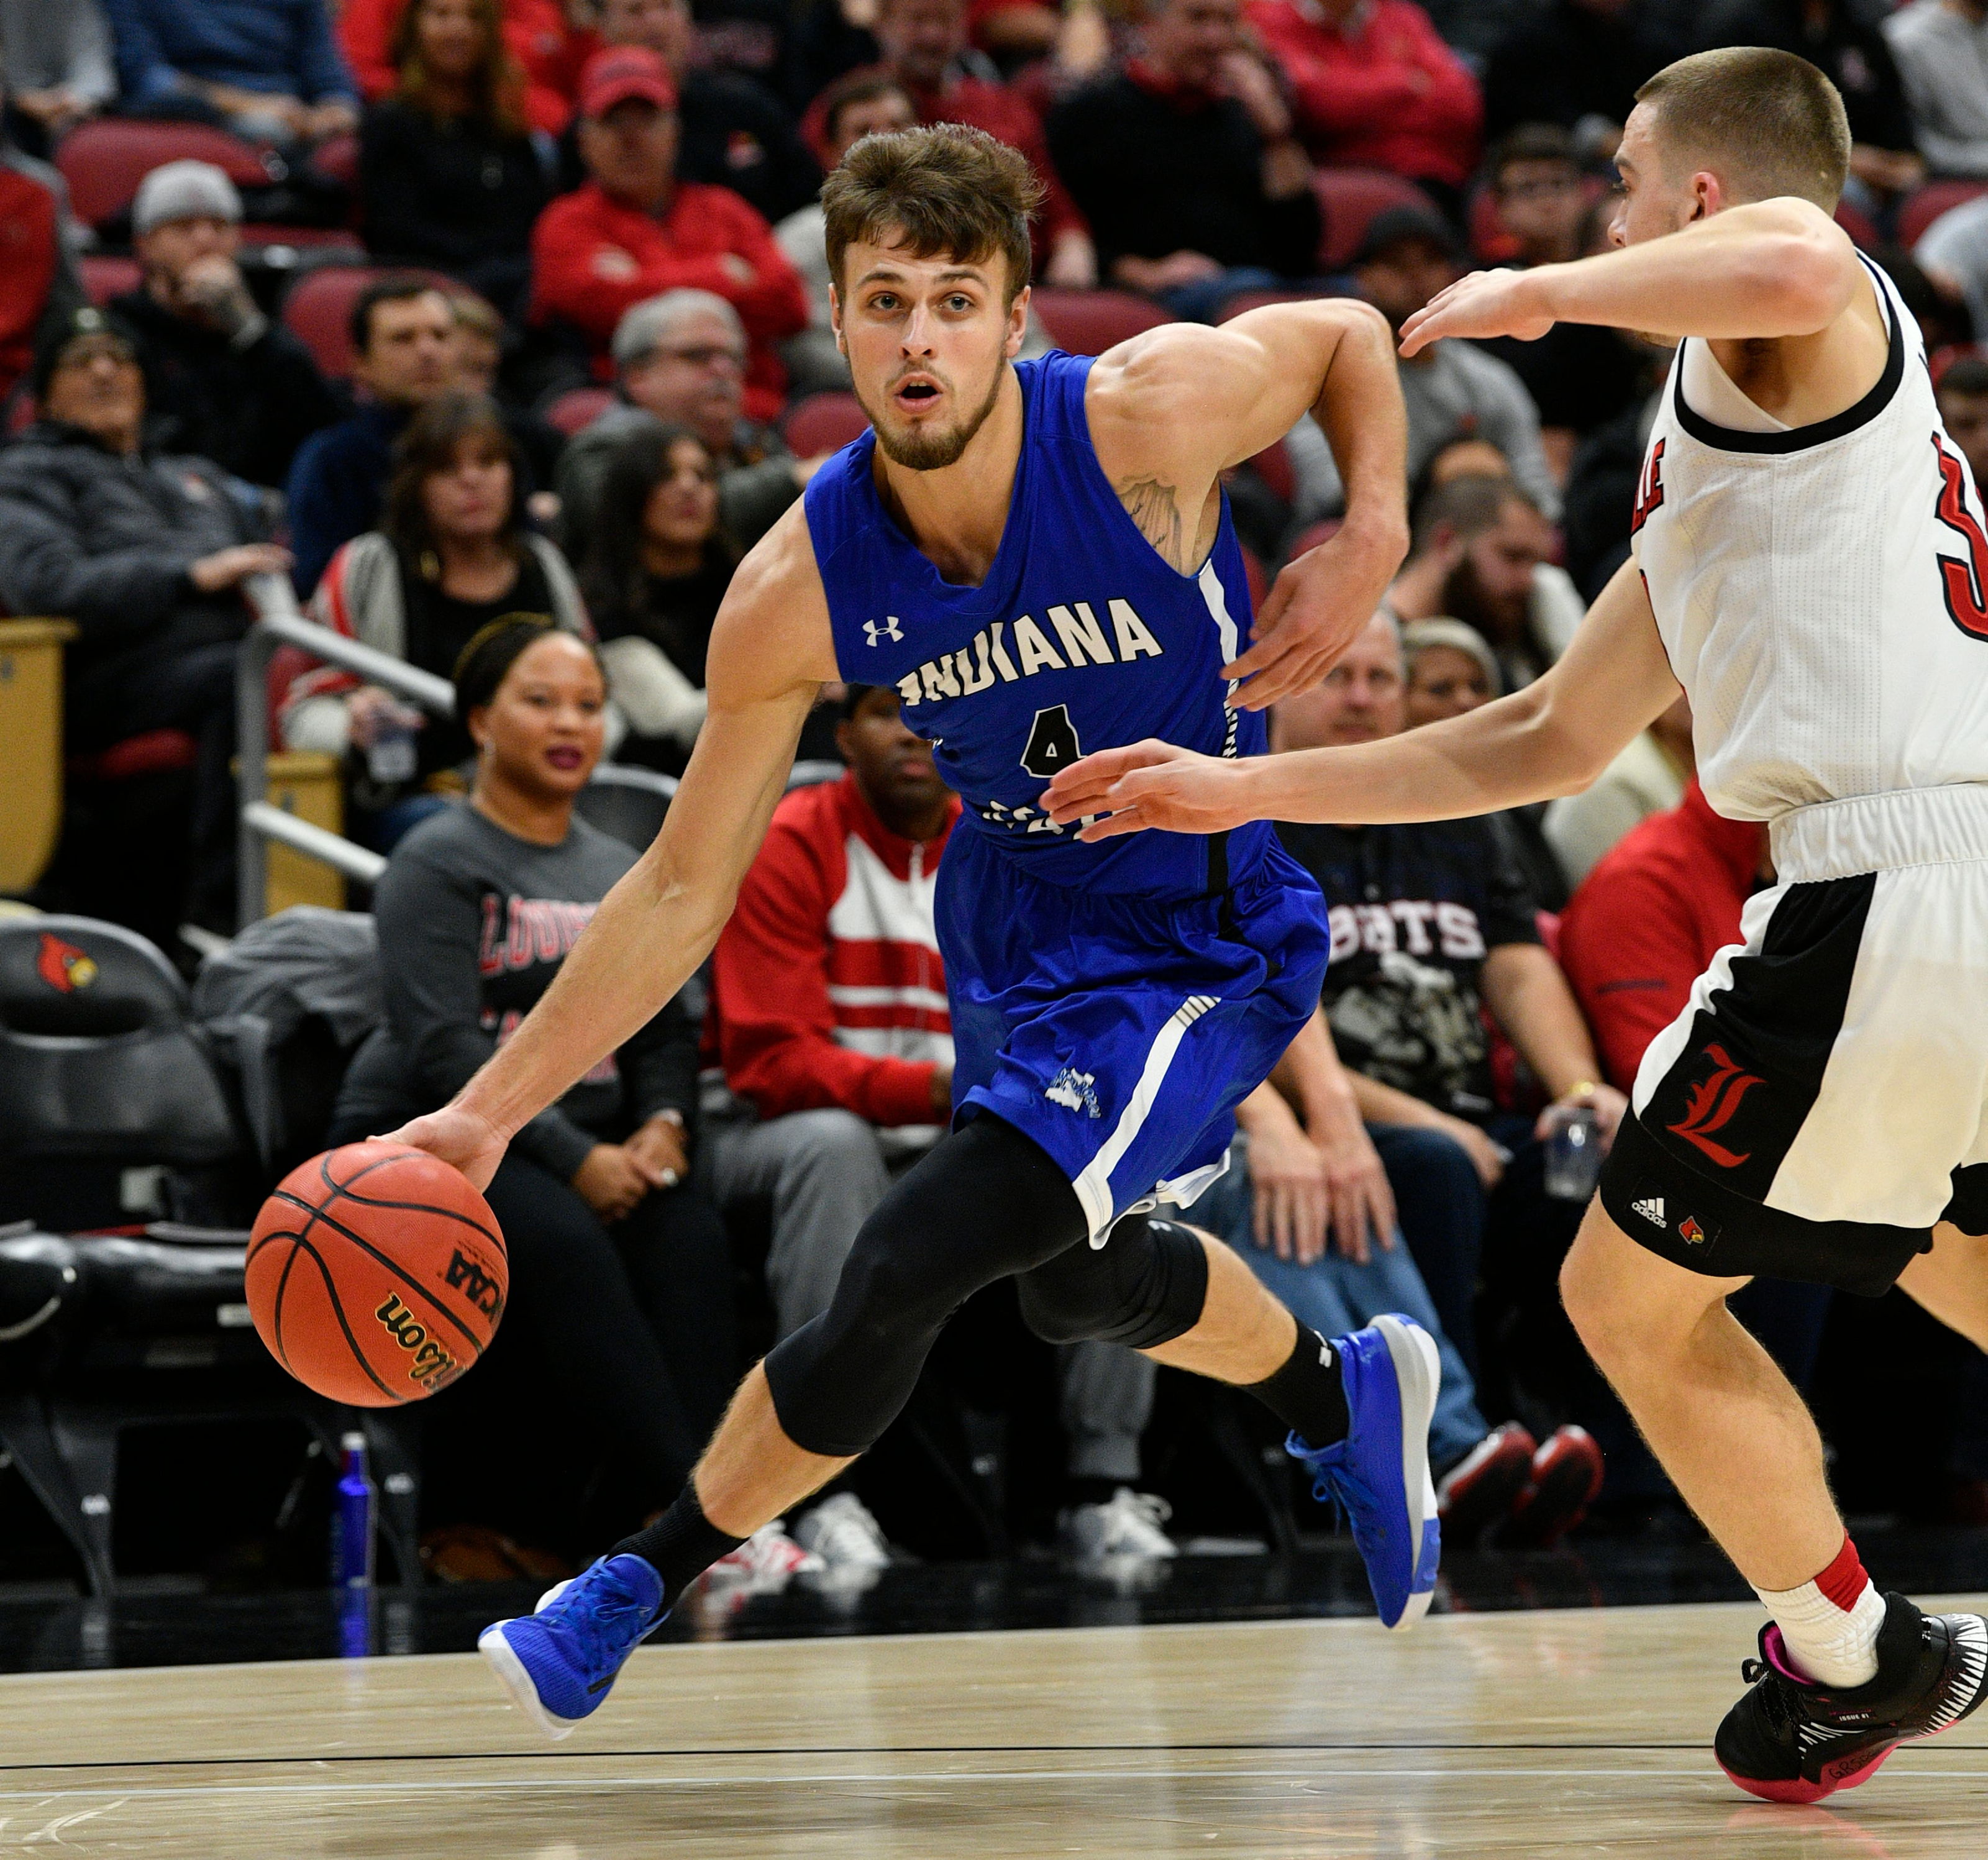 indiana-state-basketball-sycamores-2021-22-season-preview-and-outlook